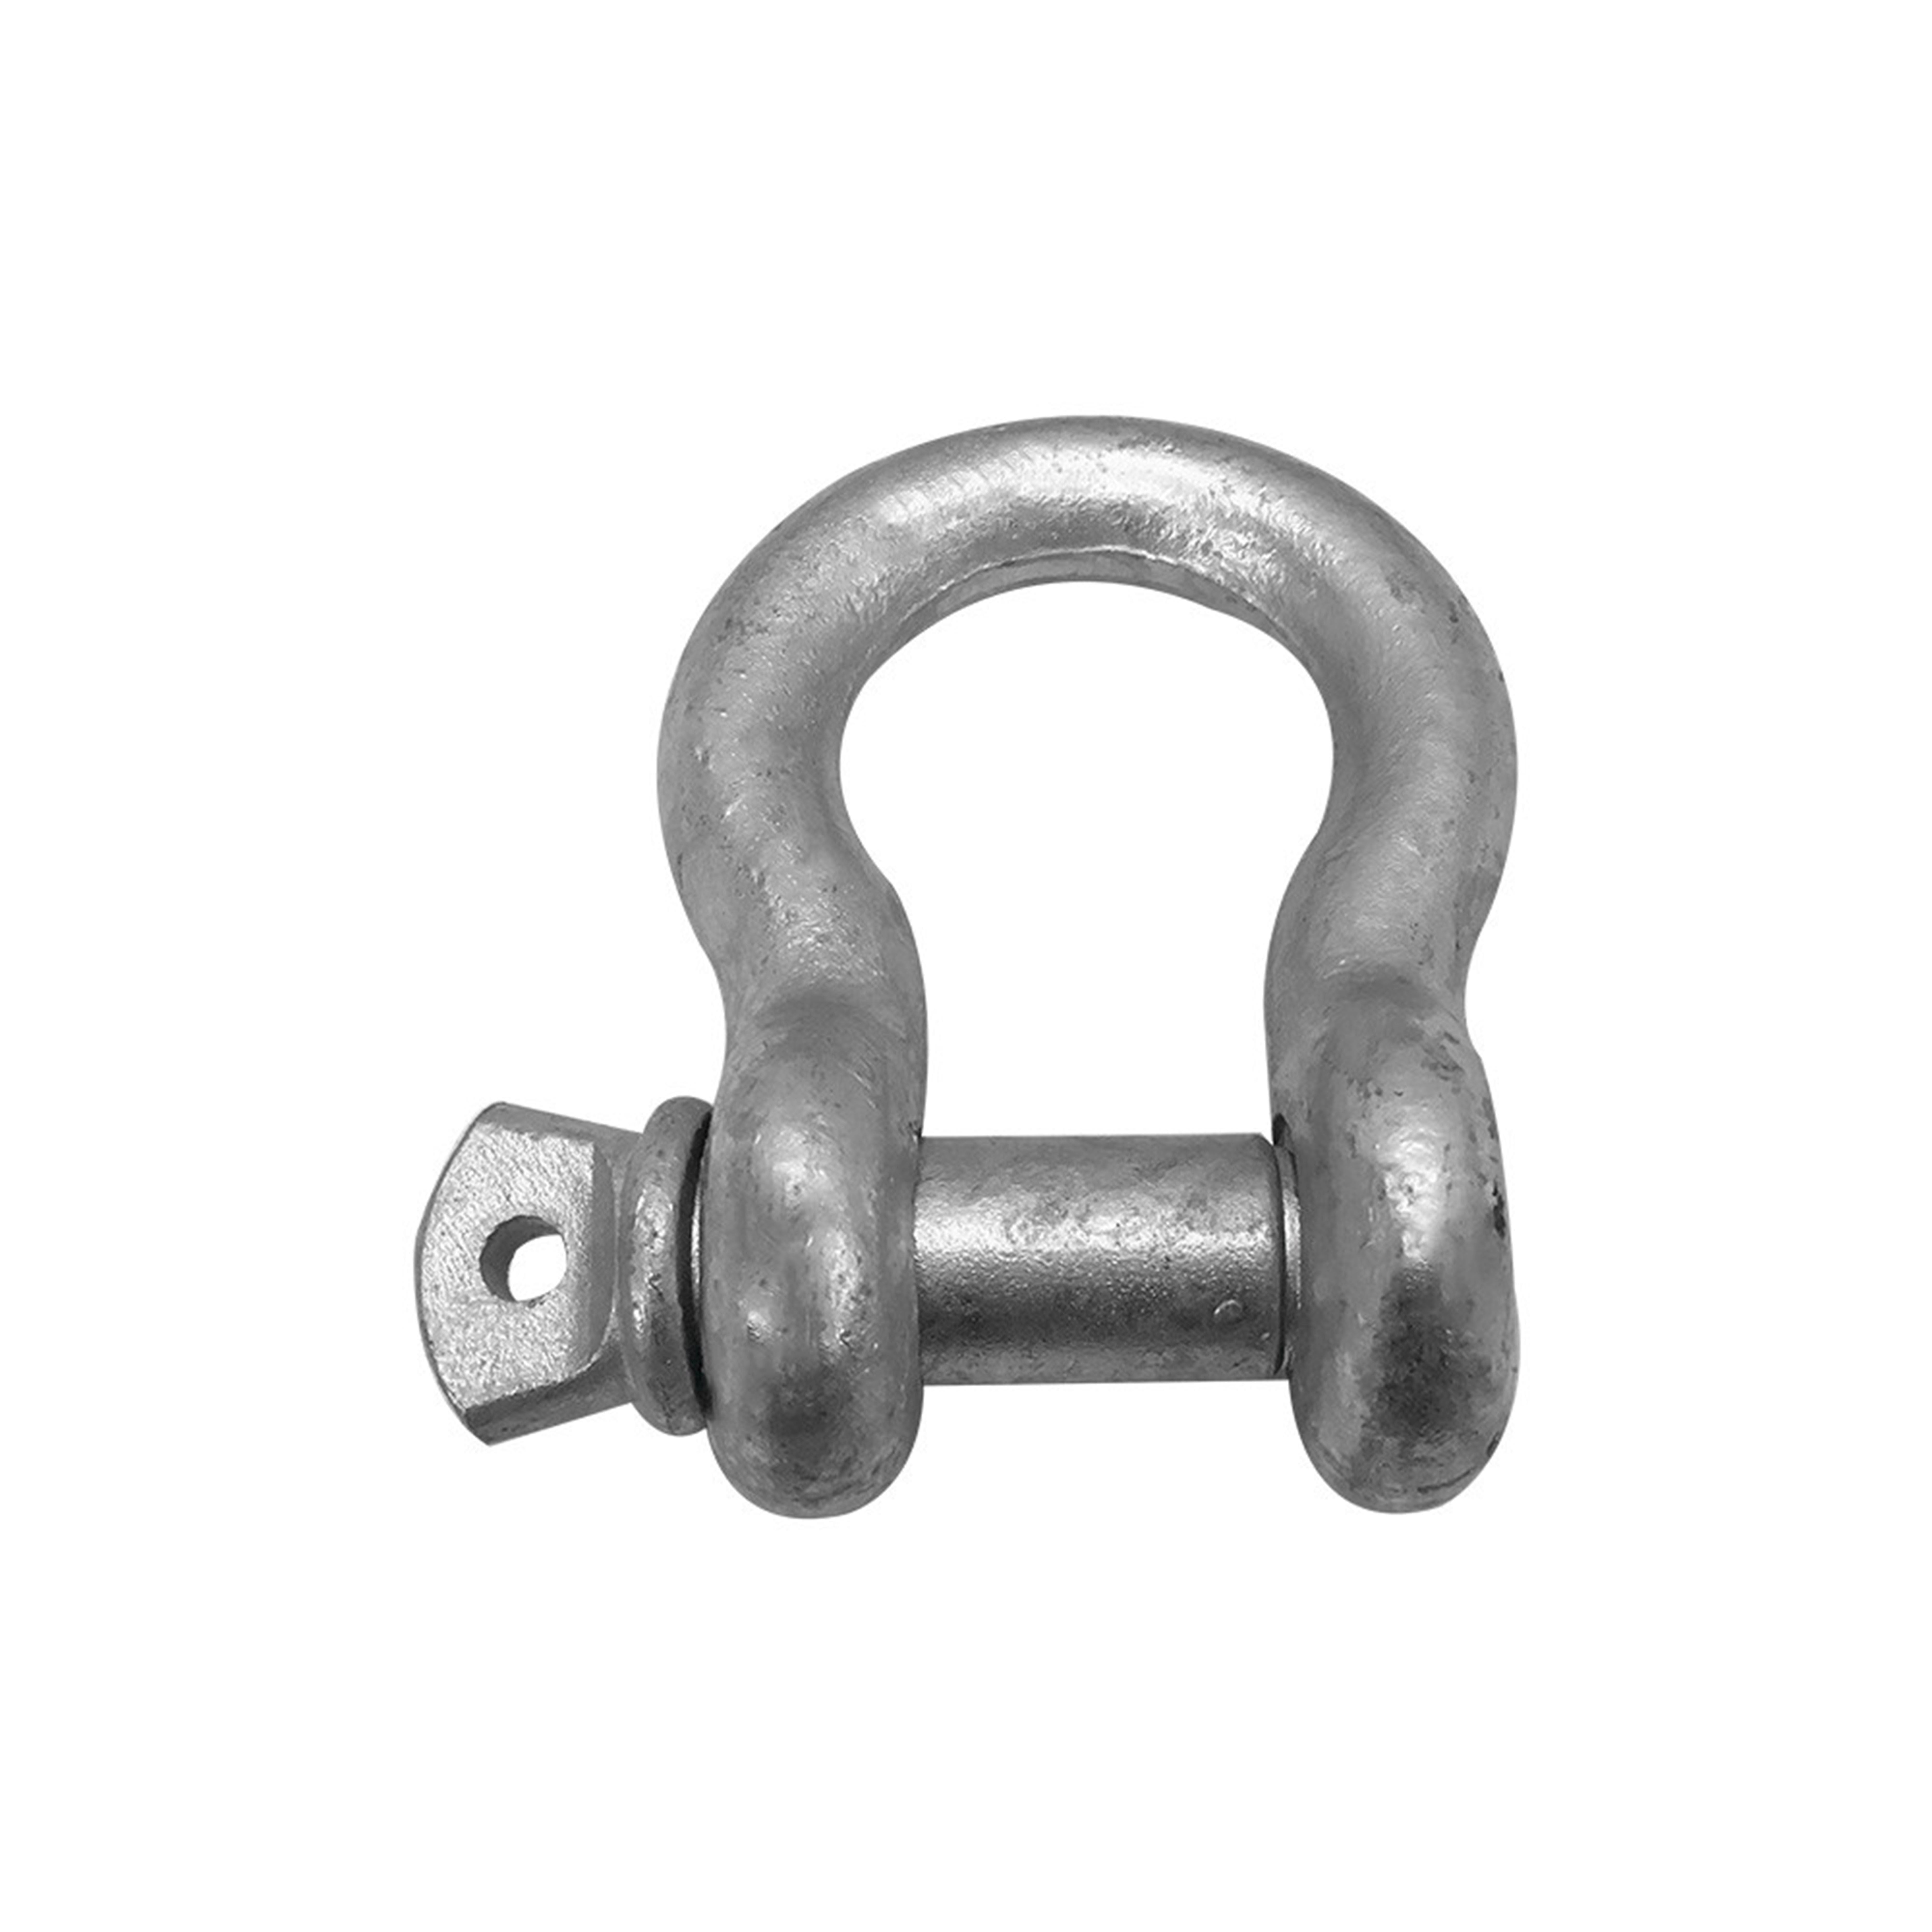 Galvanized Anchor Shackle 2000 lbs Clevis Bow Lifting Crown Bolt 3/8 in 4 pck 